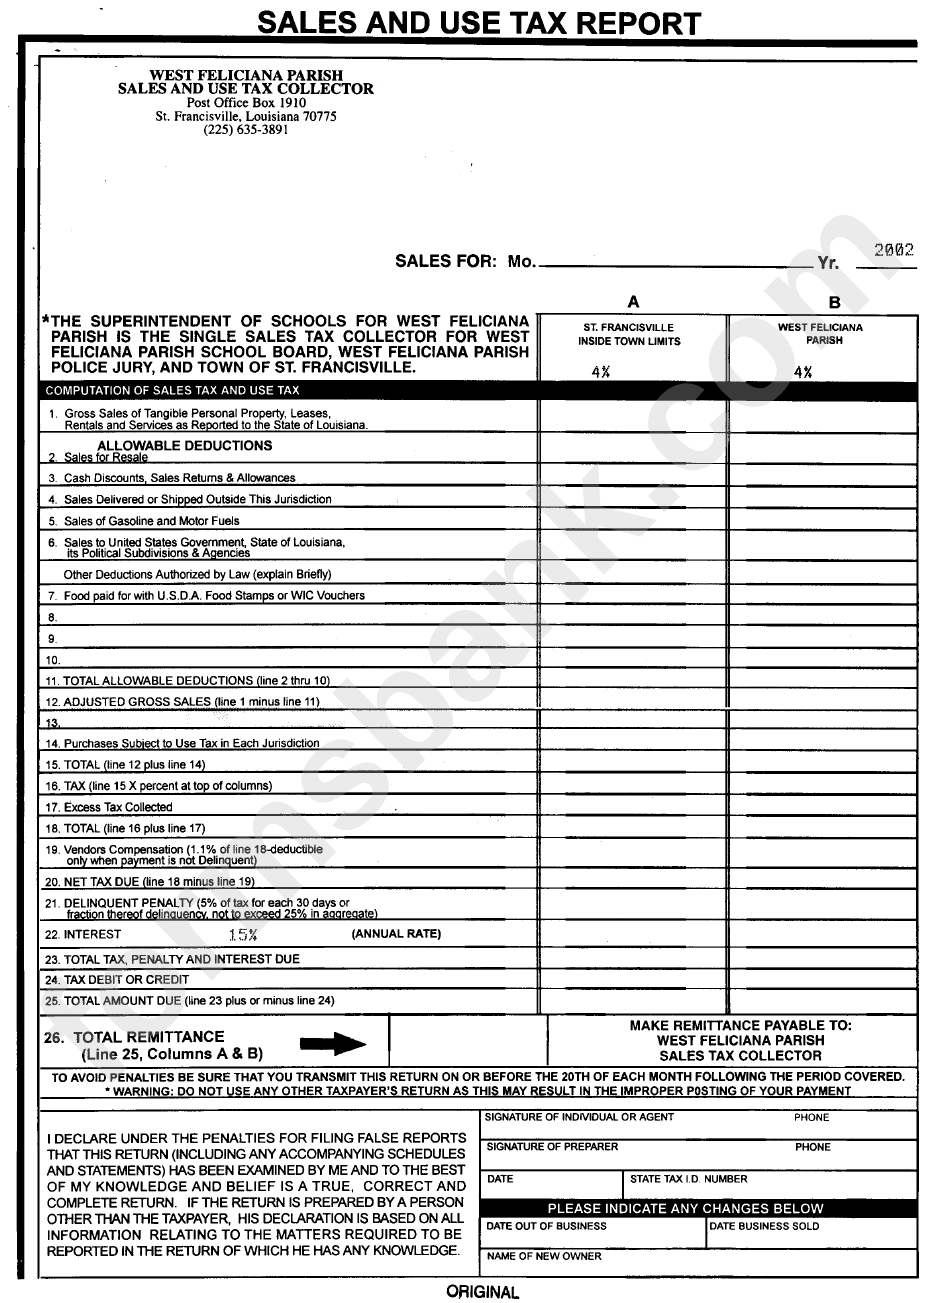 Sales And Use Tax Report - West Feliciana Parish Sales And Use Tax Collector